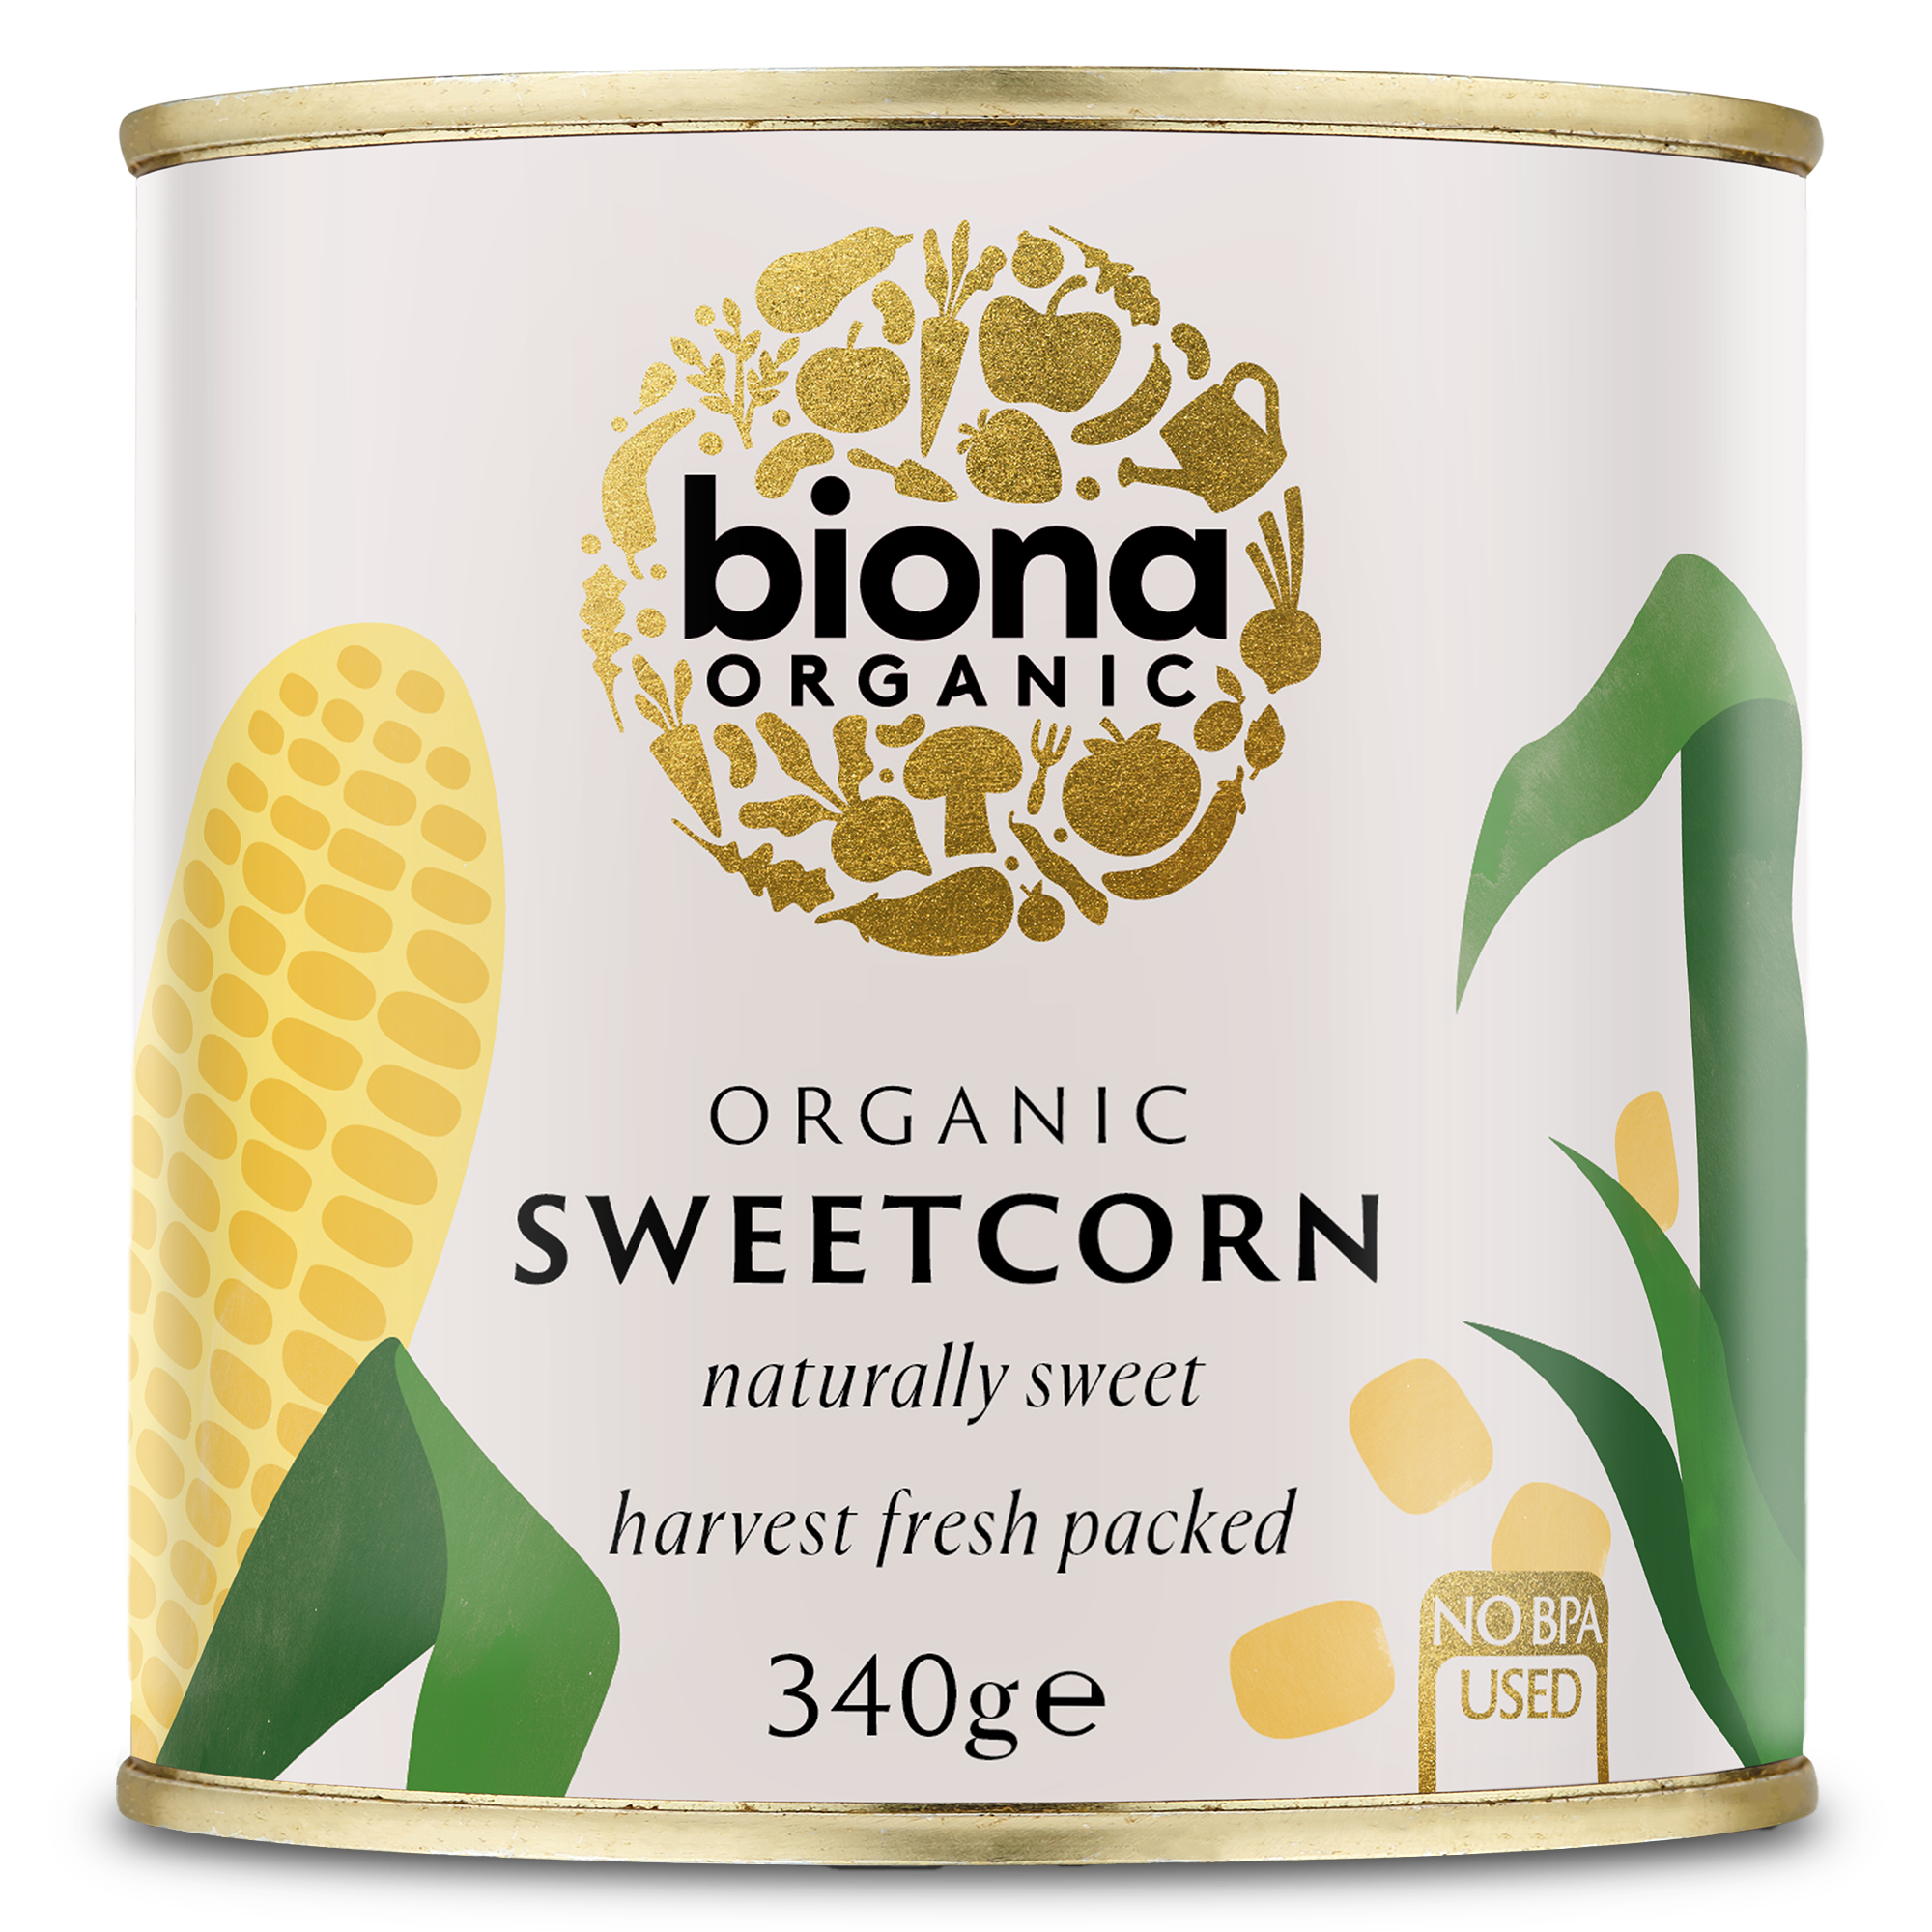 SWEETCORN IN CANS